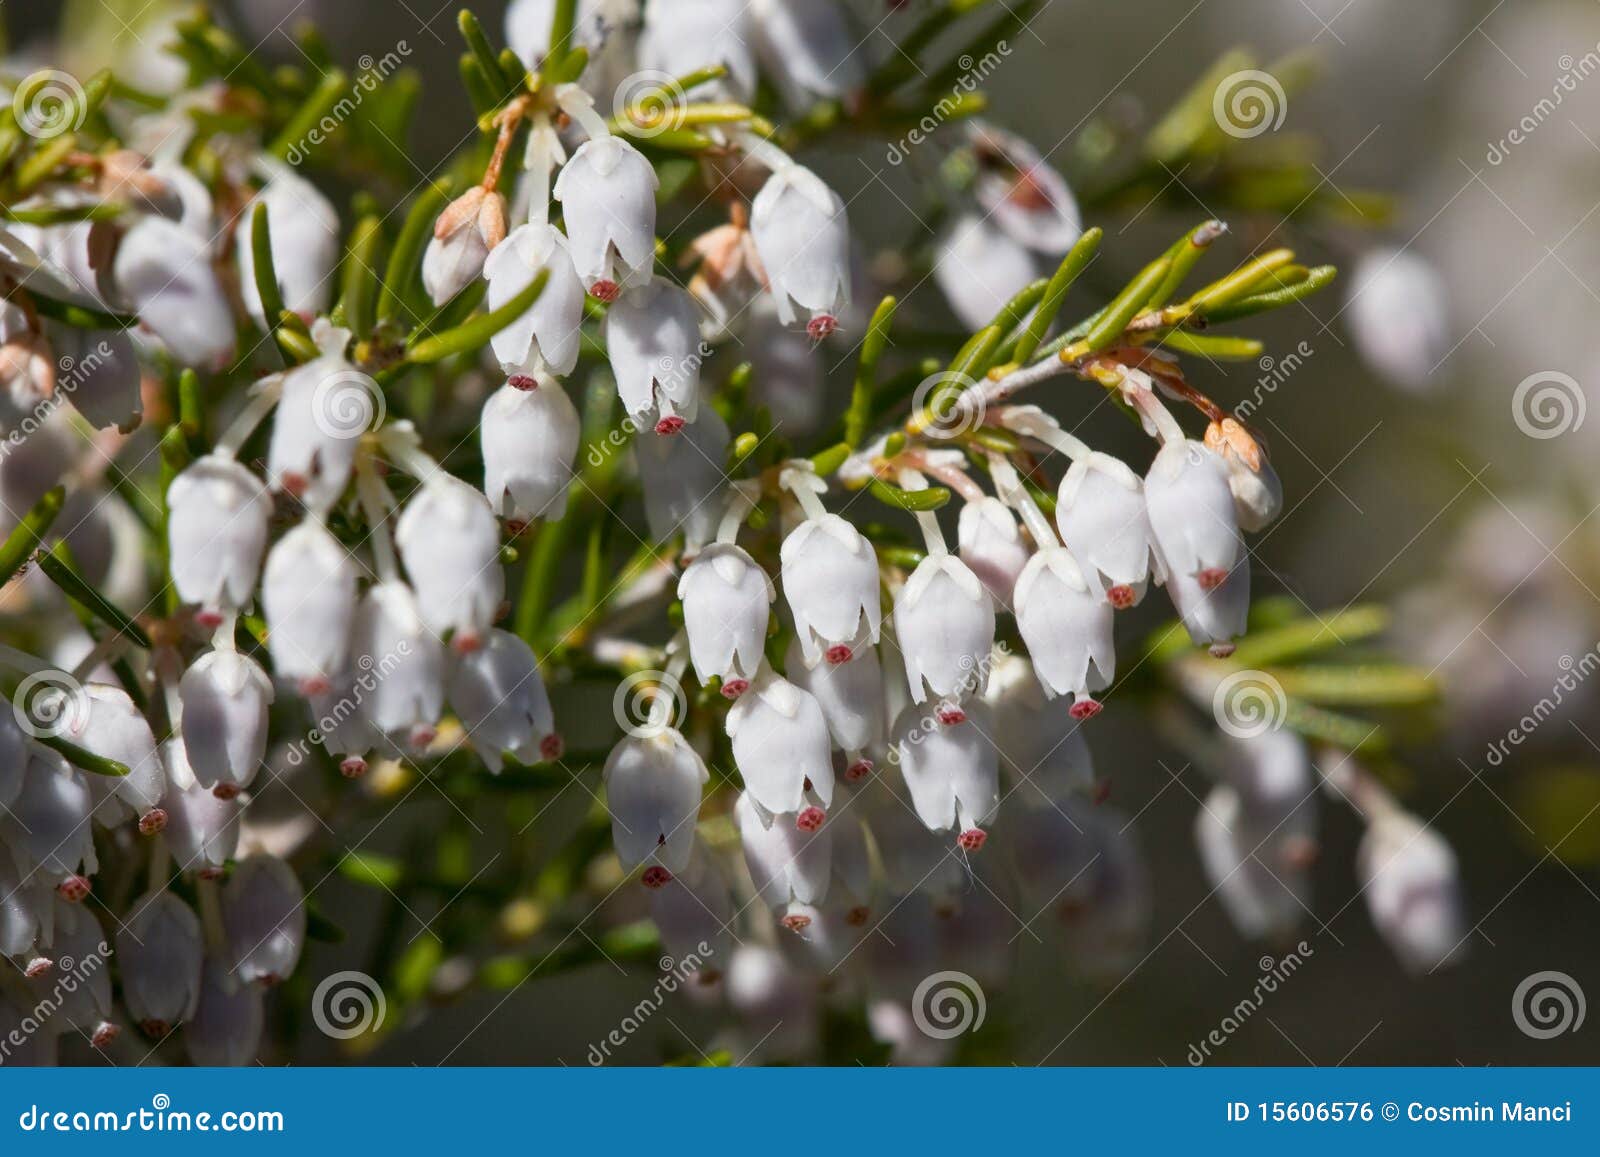 Best Erica Gracilis Royalty-Free Images, Stock Photos & Pictures